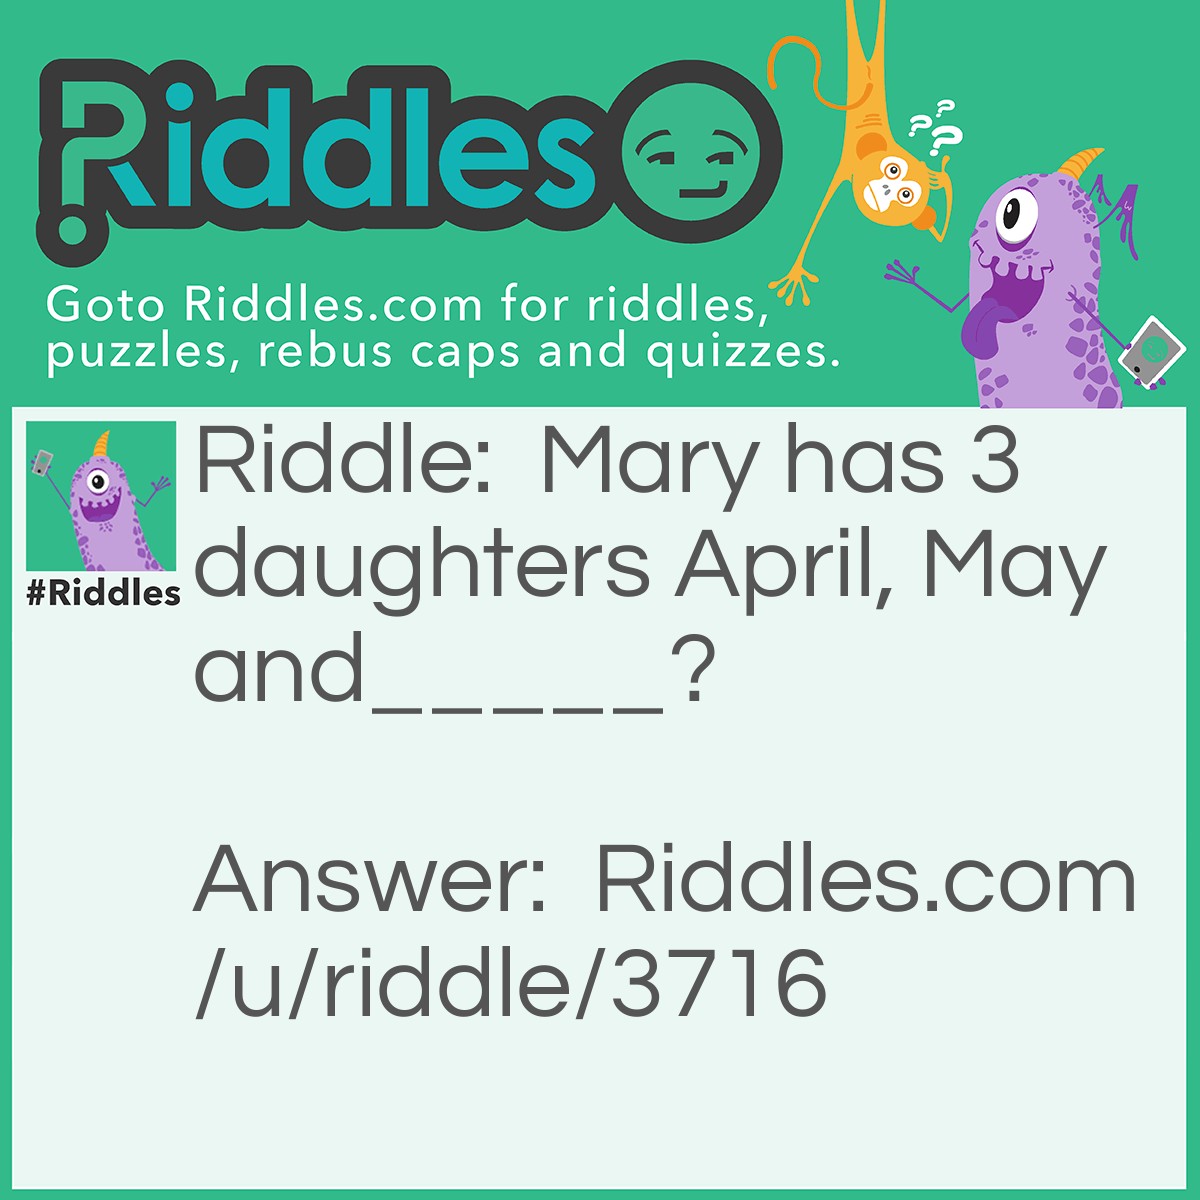 Riddle: Mary has 3 daughters April, May and_____? Answer: June? No it's Mary